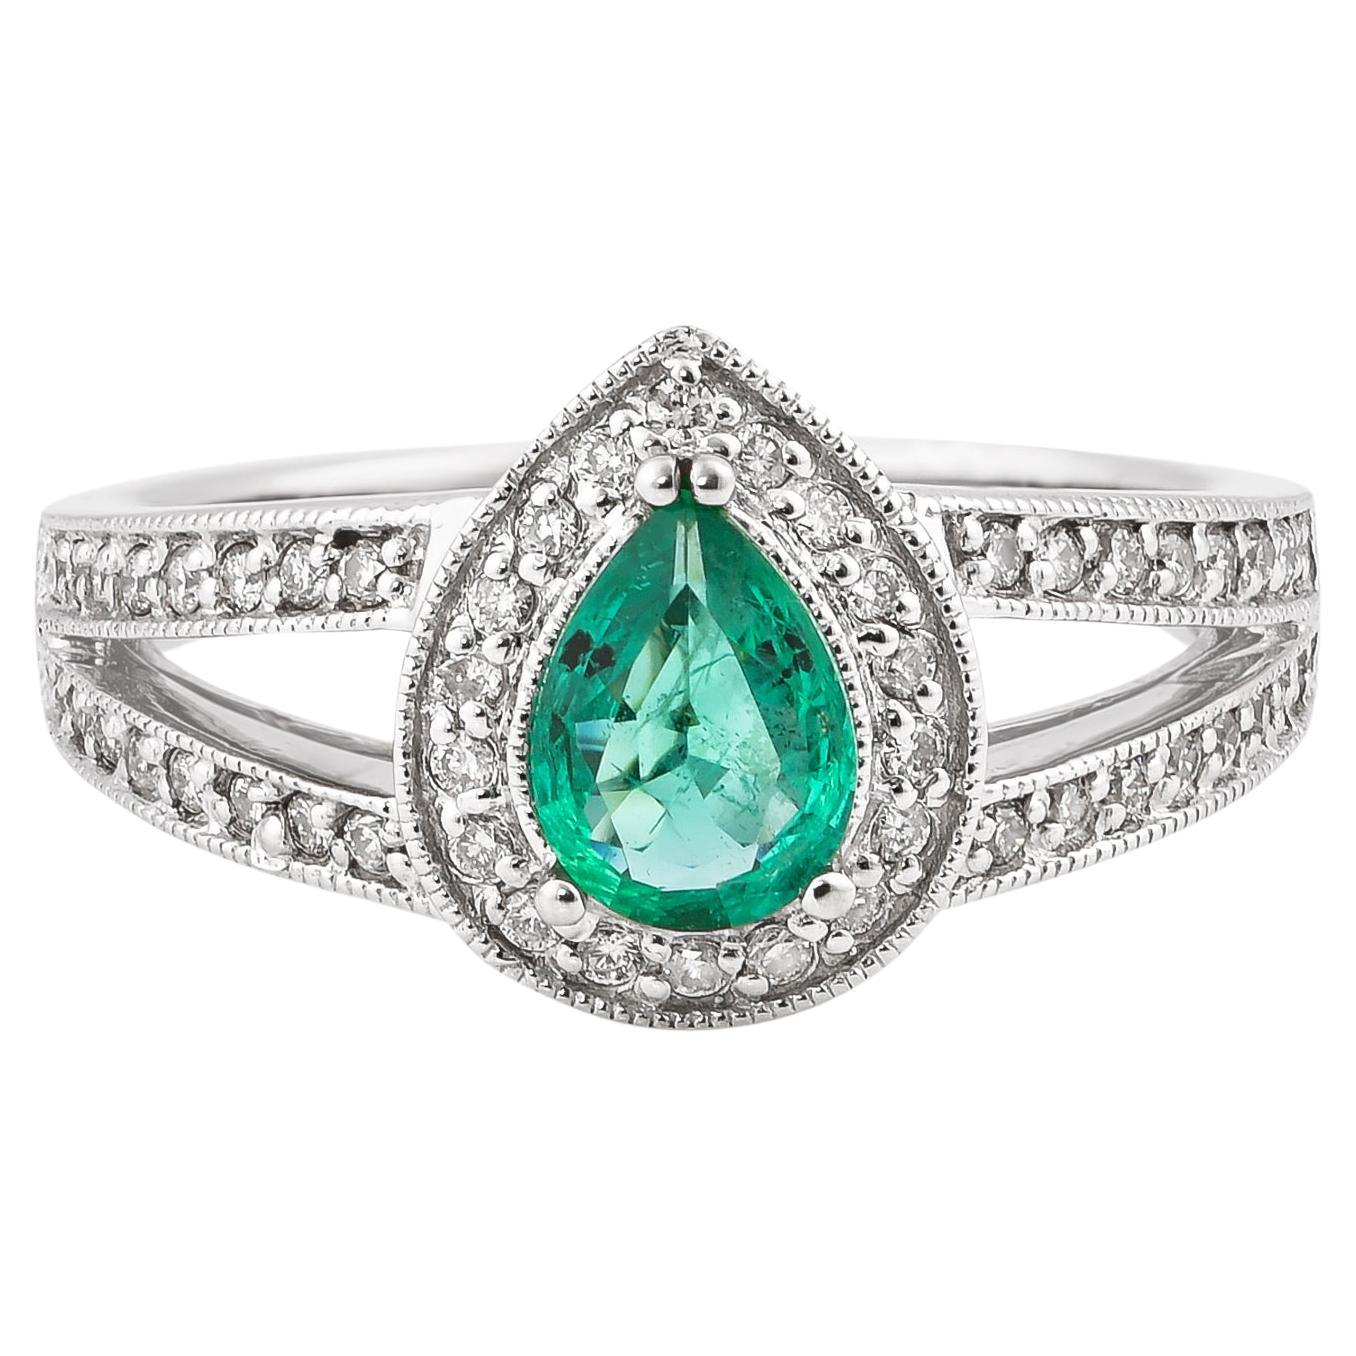 0.5 Carat Emerald and White Diamond Ring in 14 Karat White Gold For Sale